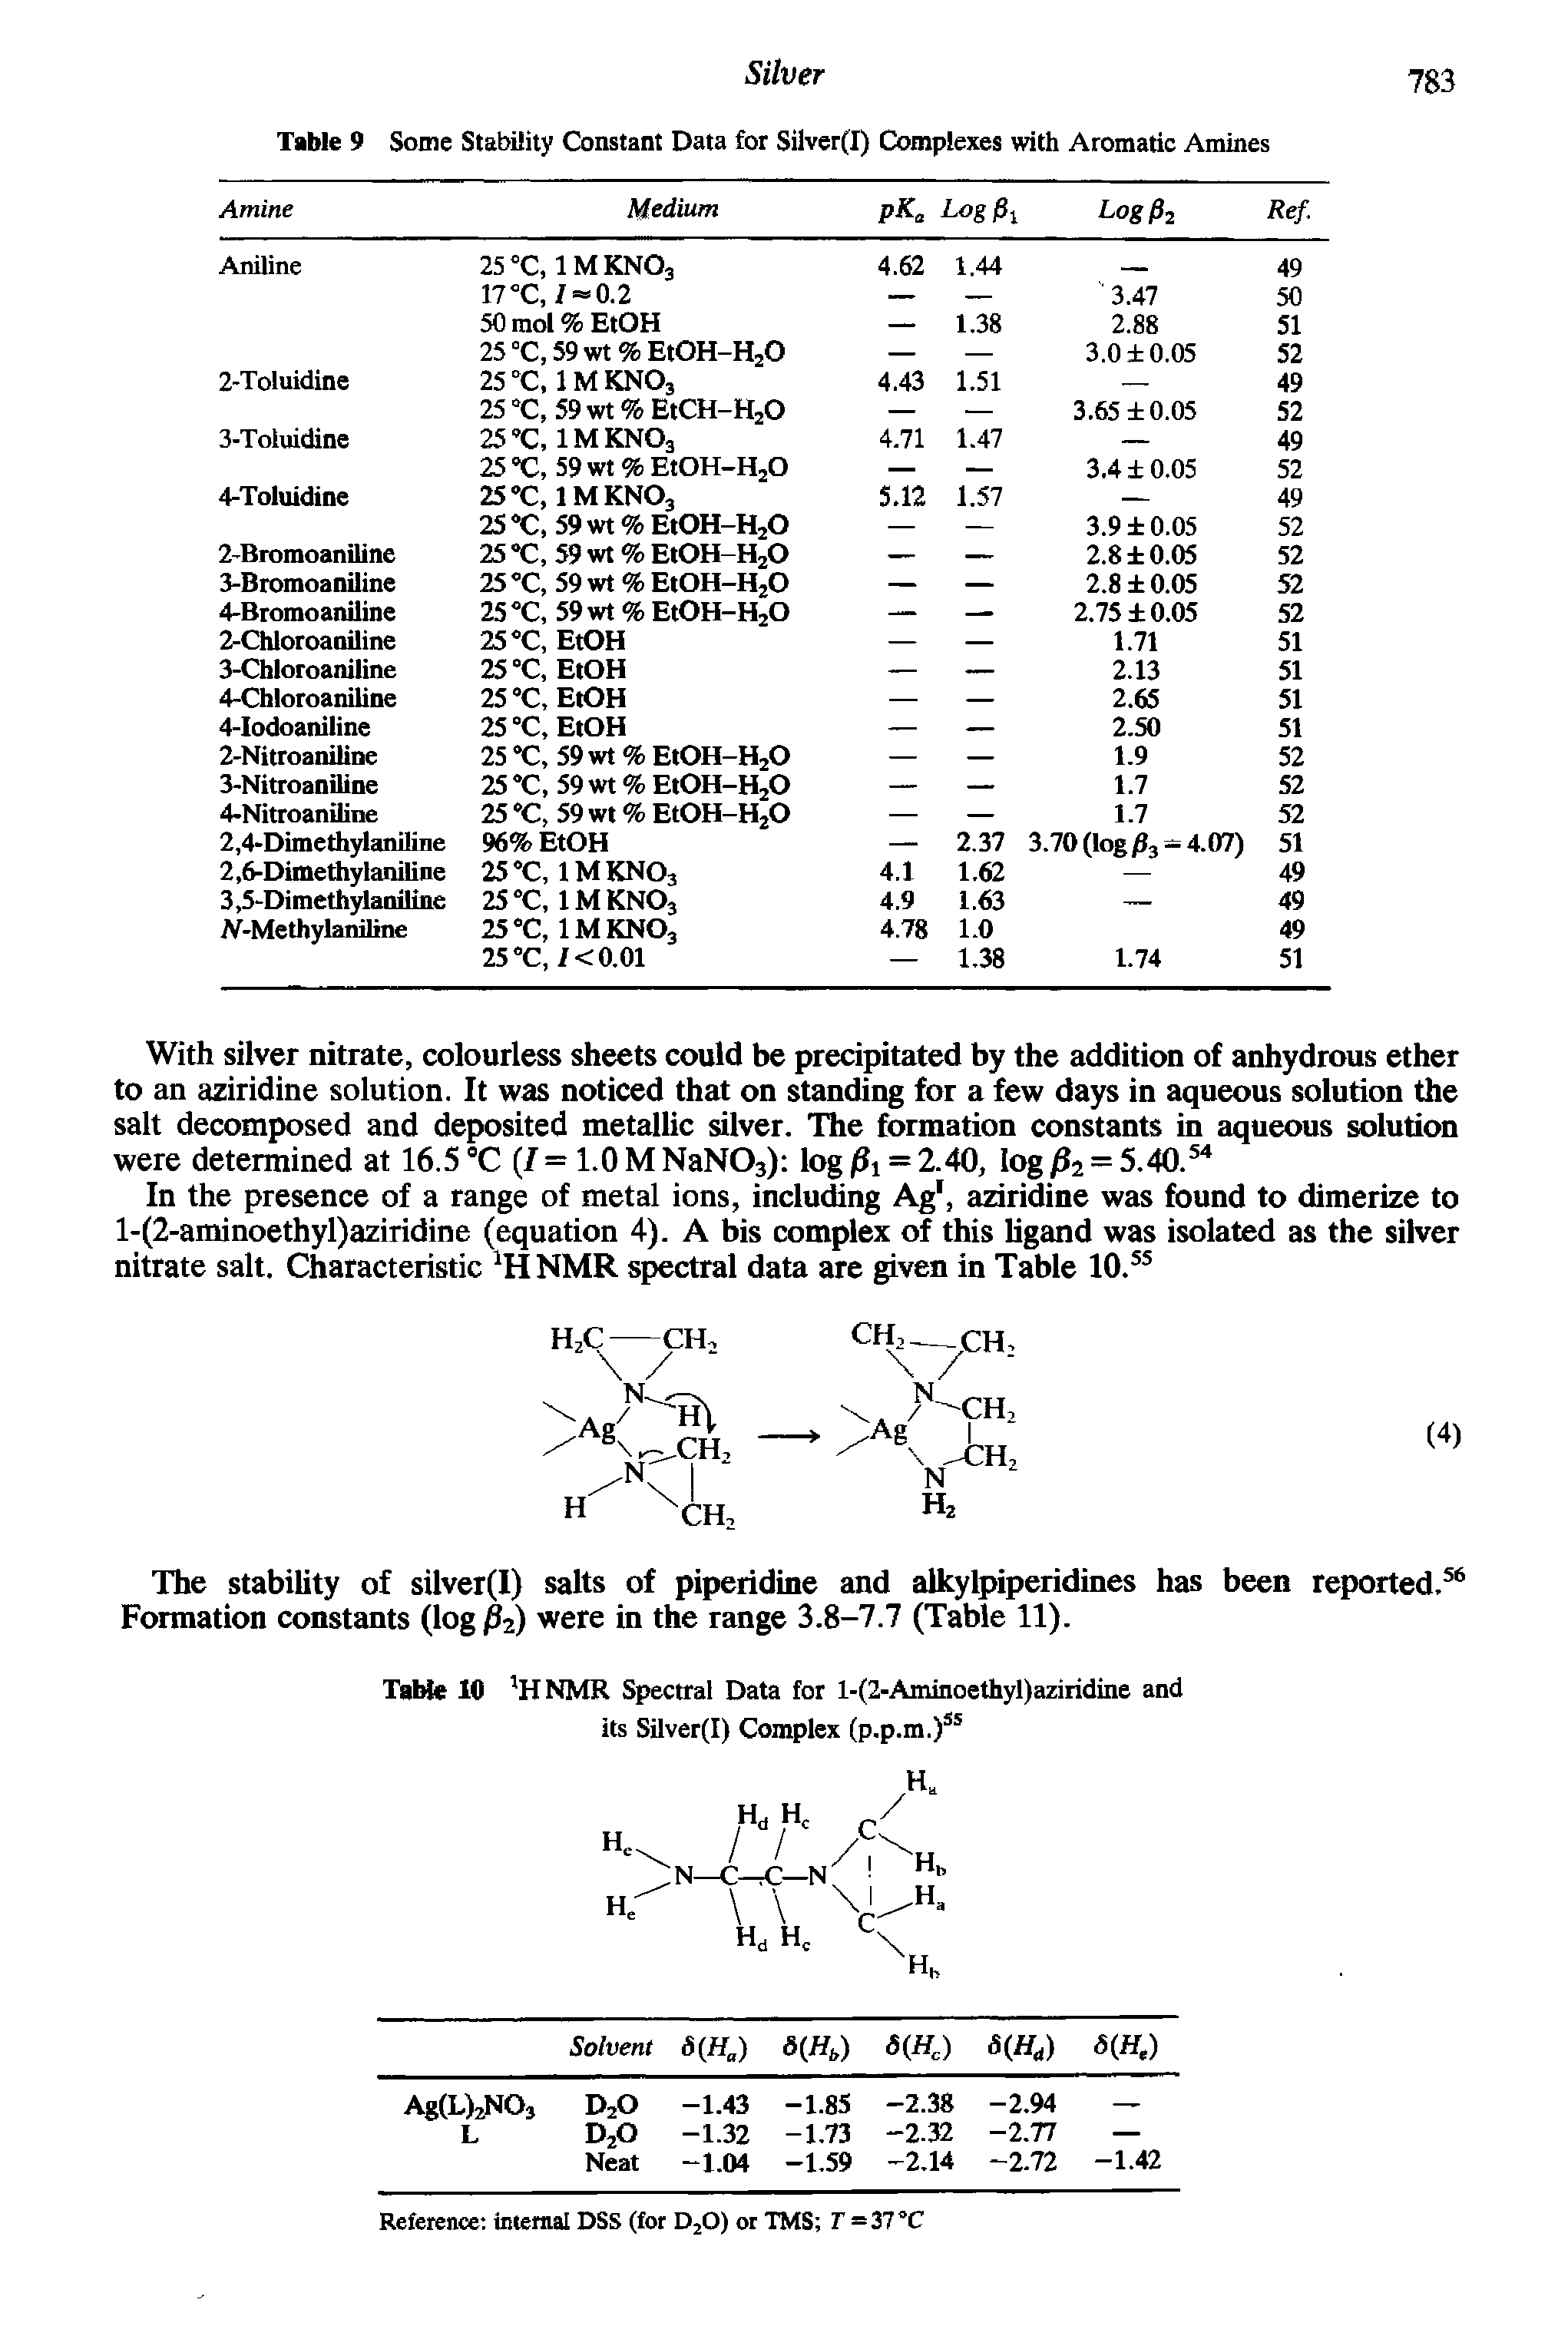 Table 10 HNMR Spectral Data for l-(2-Aininoethyl)aziridine and its Silver(I) Complex (p.p.m.)ss...